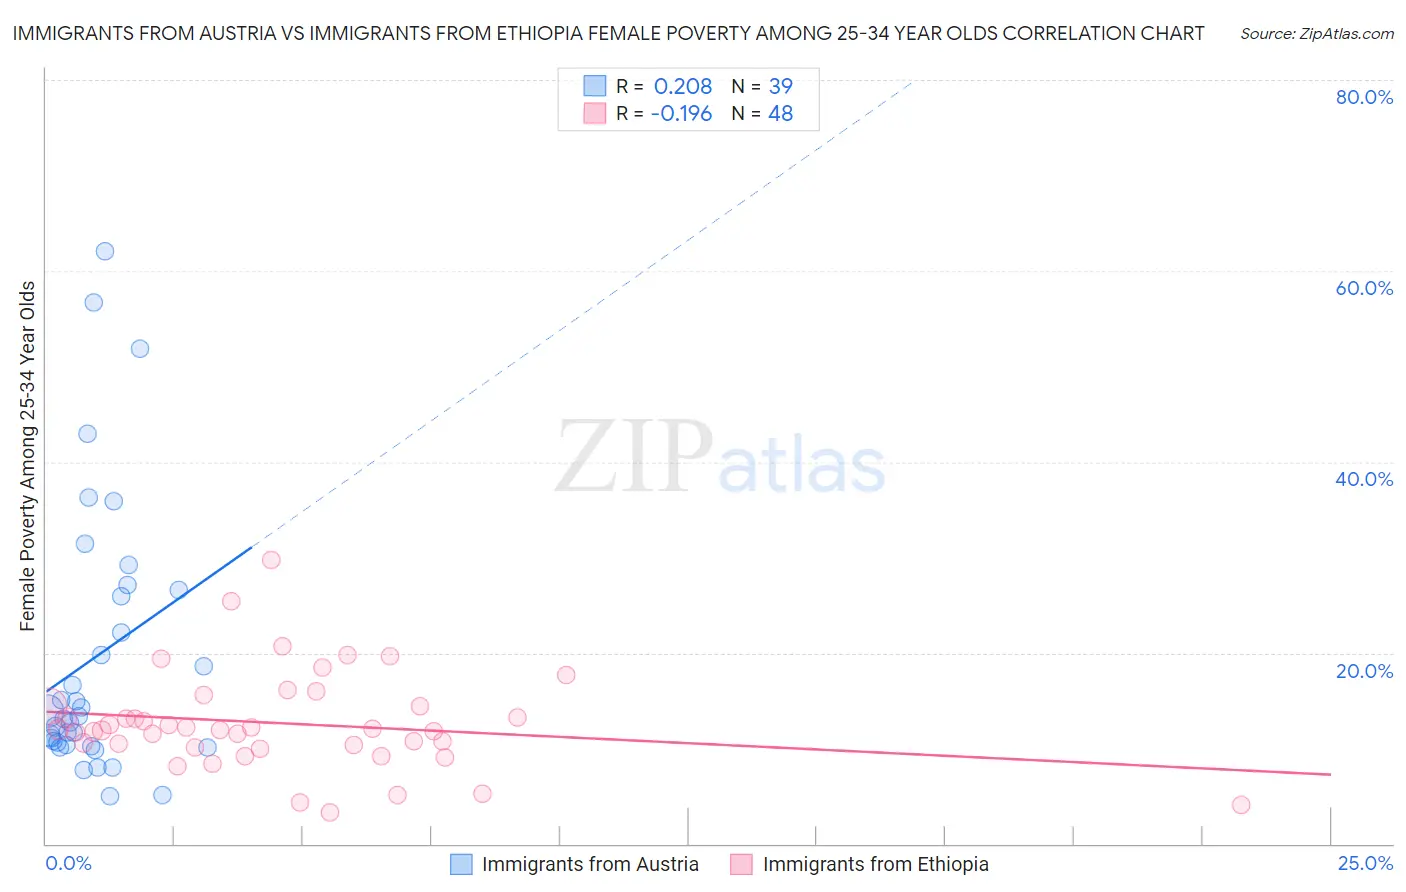 Immigrants from Austria vs Immigrants from Ethiopia Female Poverty Among 25-34 Year Olds